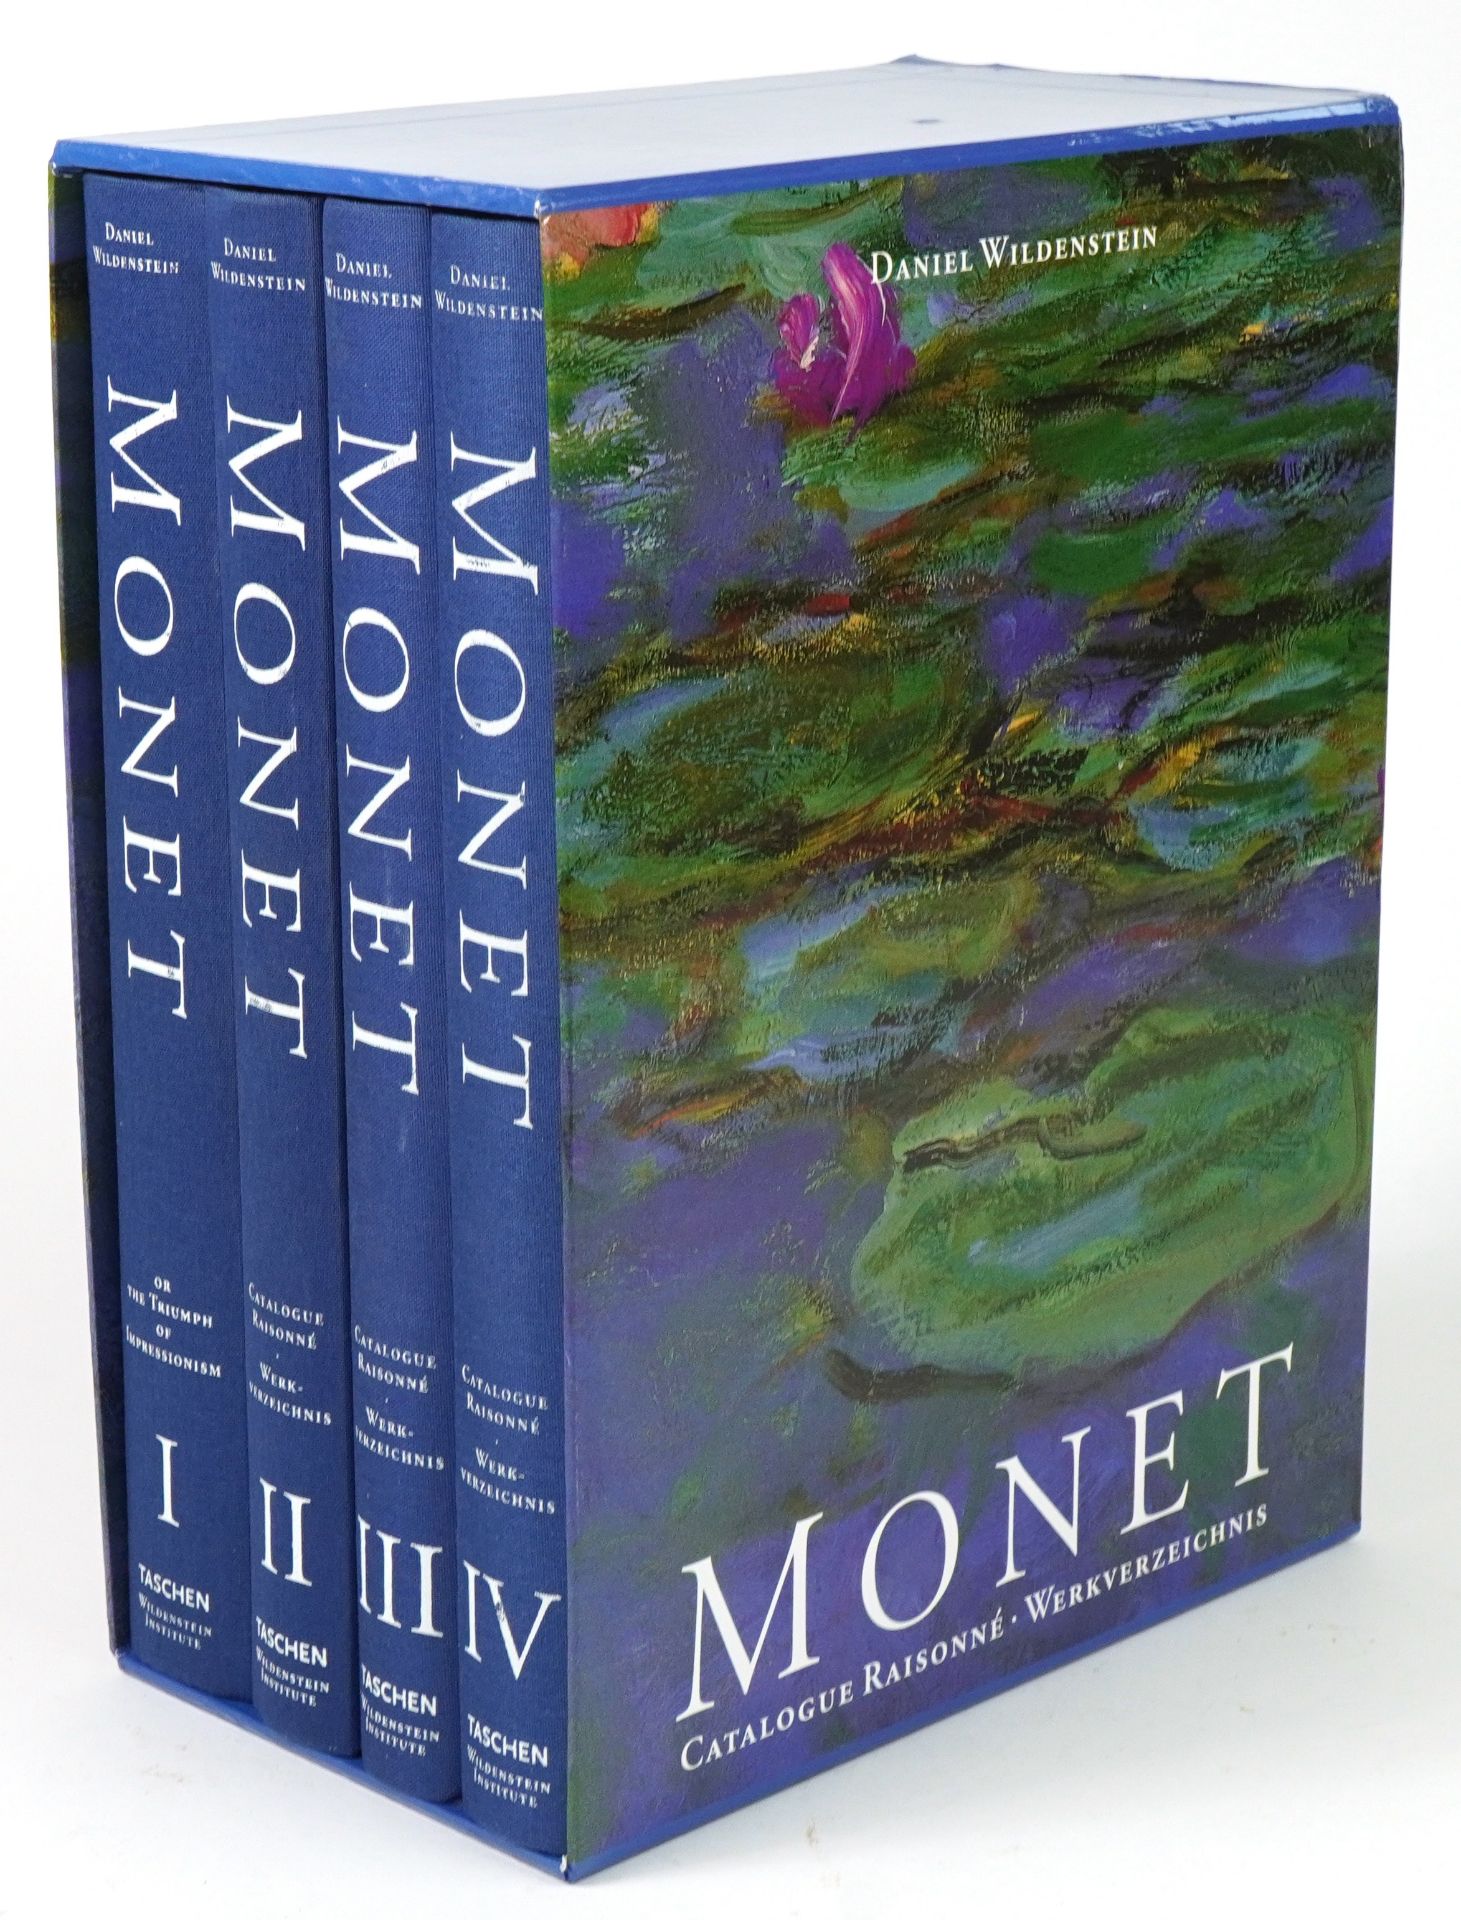 Monet Catalogue Raisonne, four volumes by Daniel Wildenstein published by Taschen : For further - Image 2 of 3